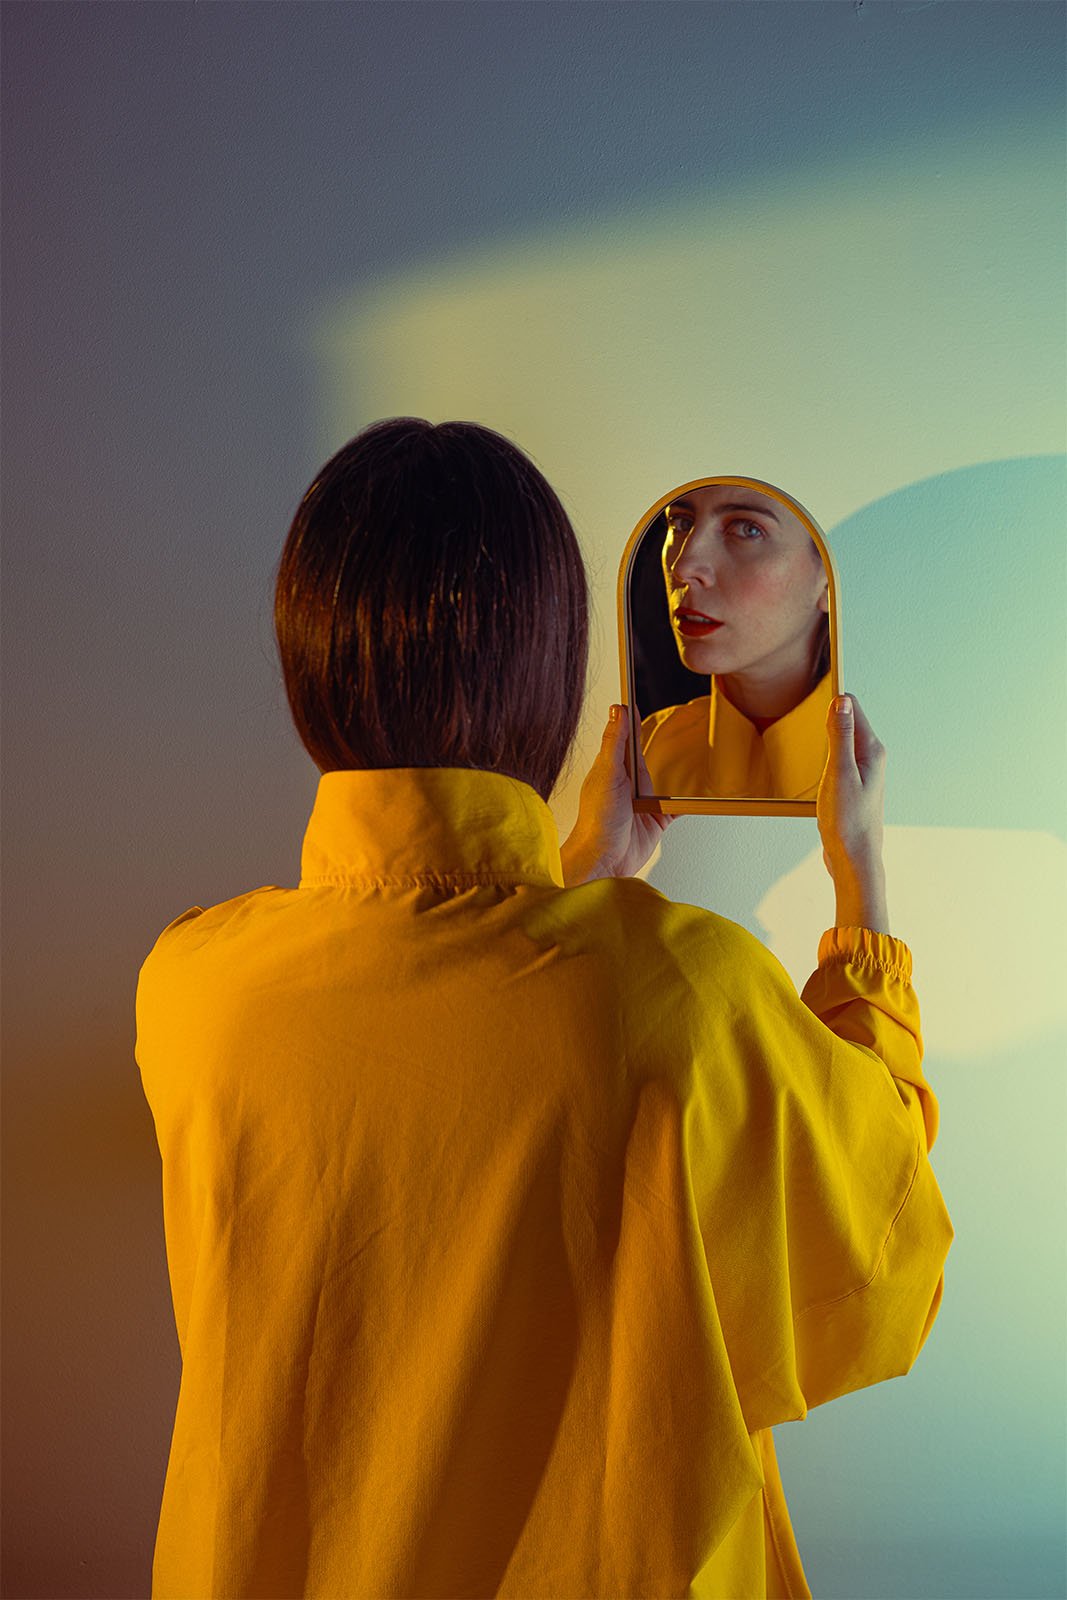 A person with shoulder-length dark hair wearing a yellow shirt stands facing away and holds a small circular mirror, reflecting their face. The background is a gradient of blue, green, and yellow. The scene is dramatically lit, casting vivid shadows.